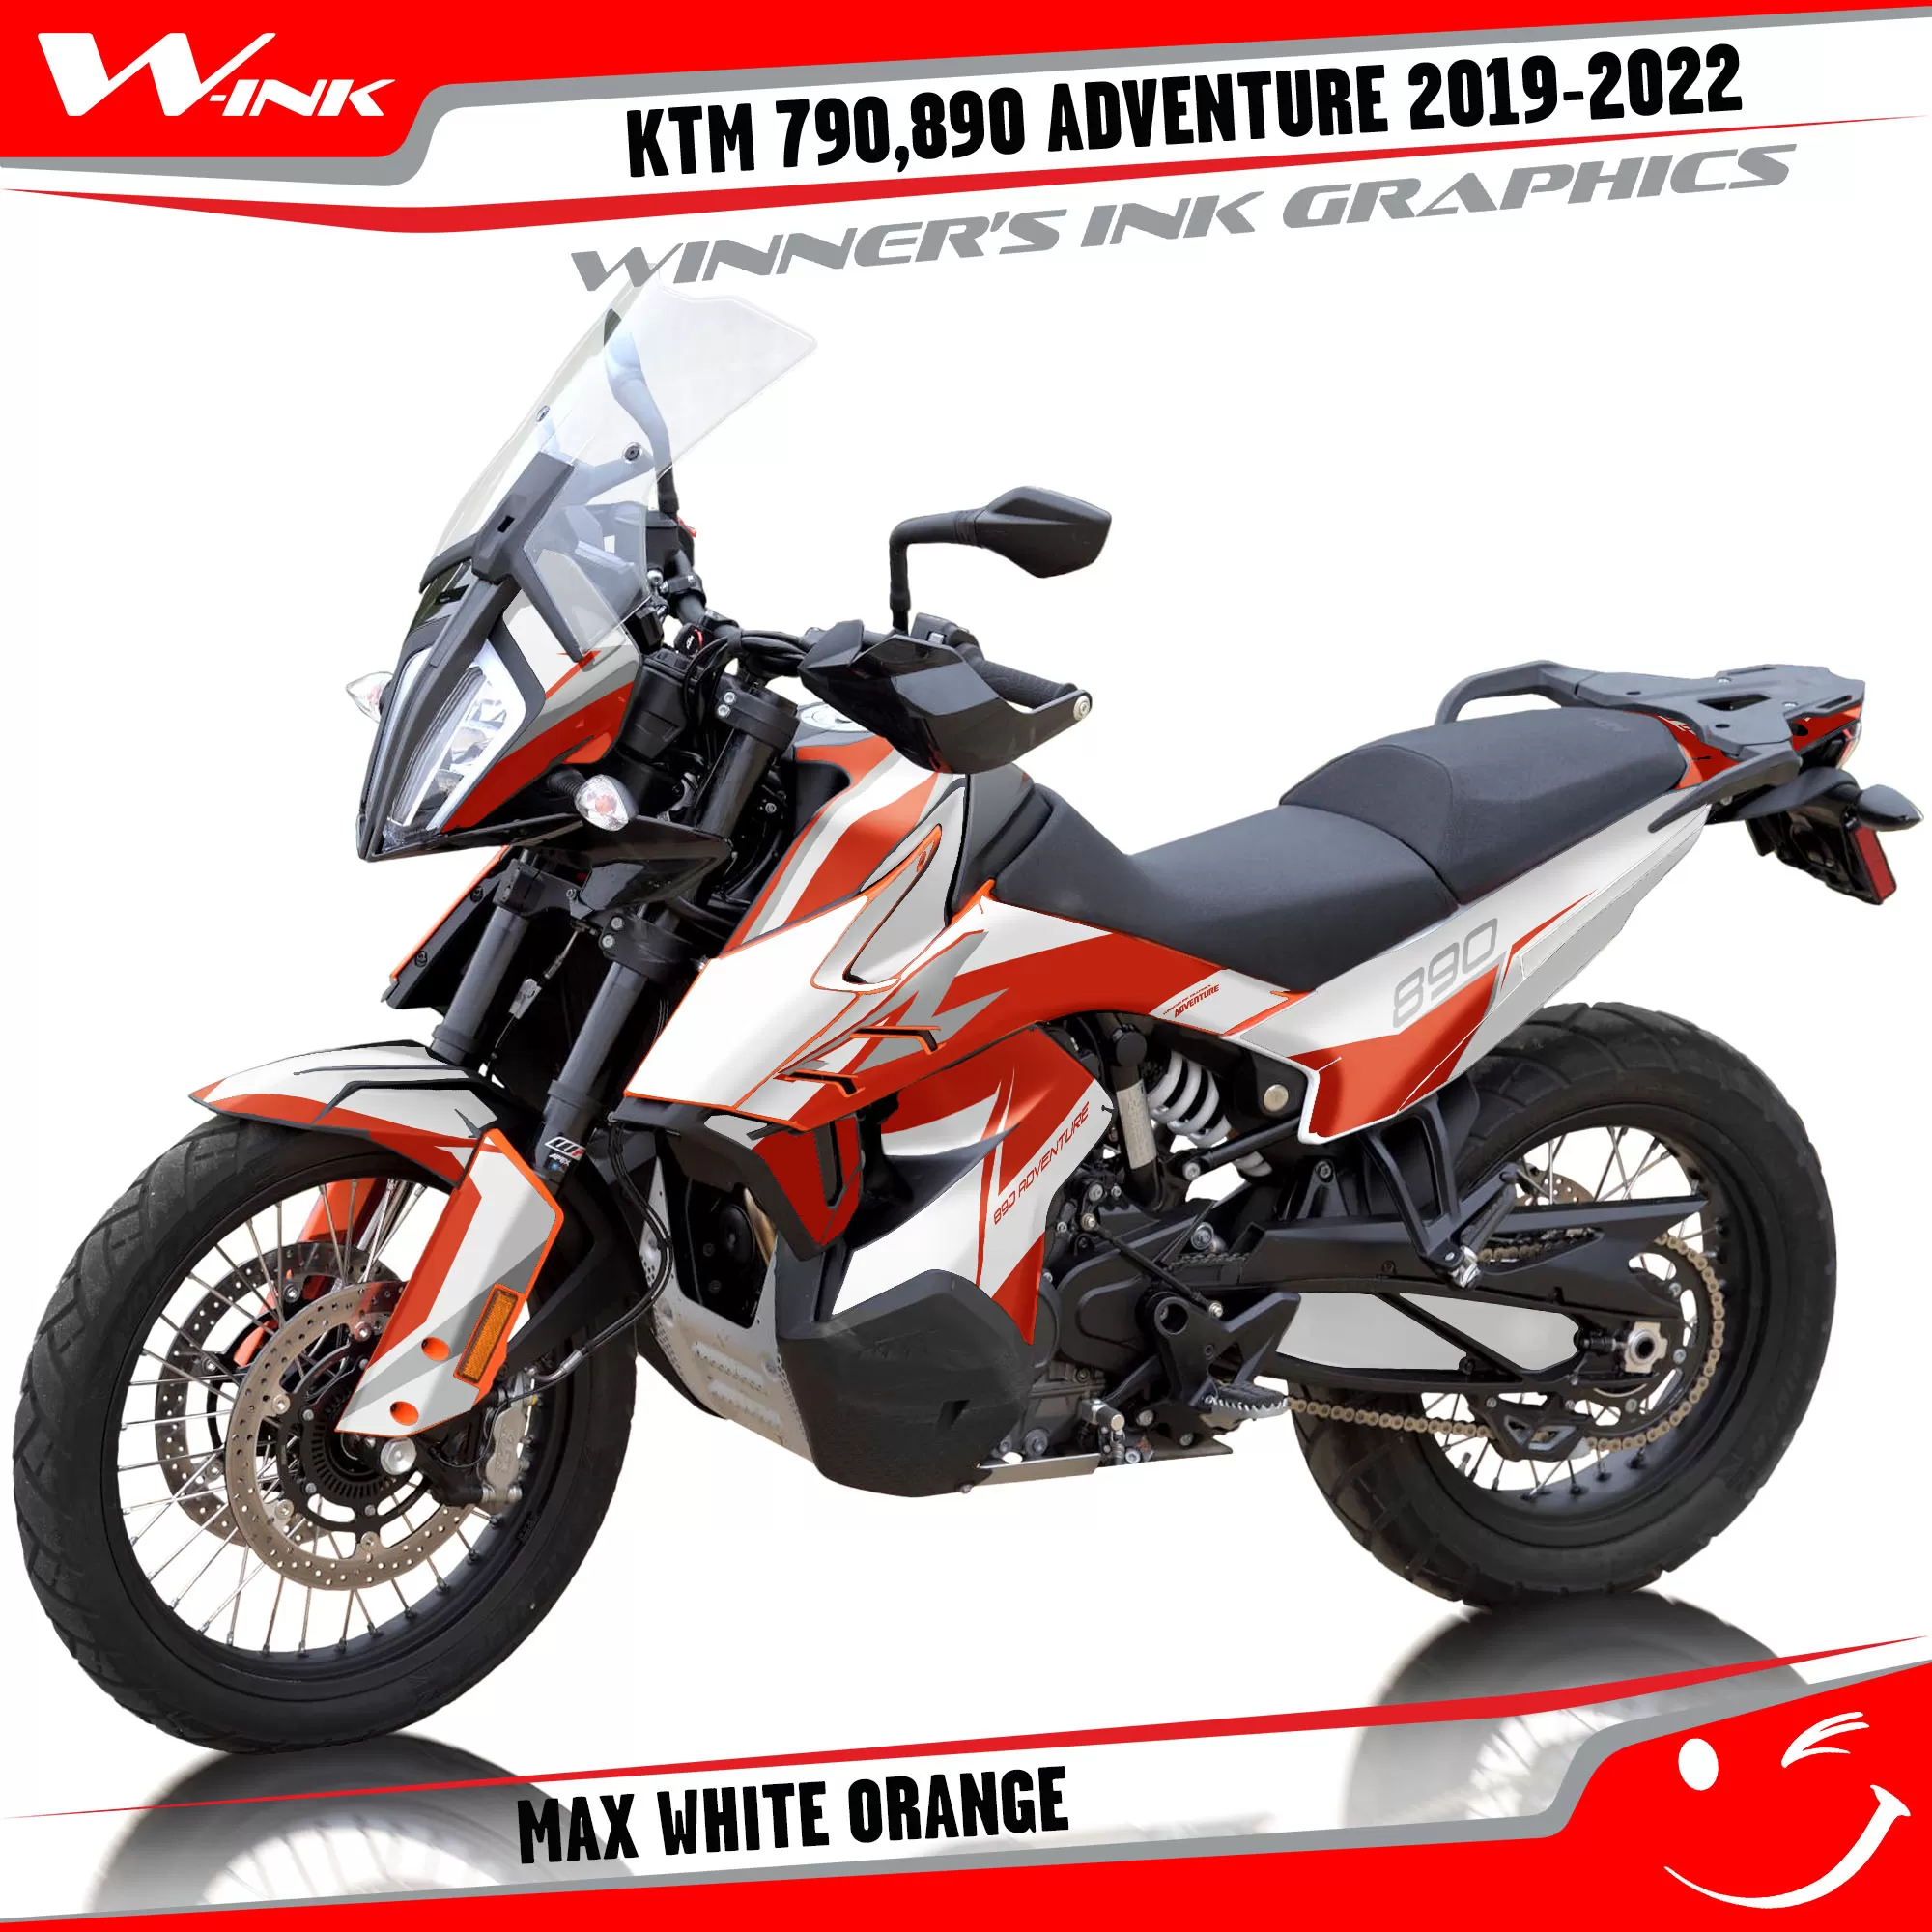 Adventure-790-890-2019-2020-2021-2022-graphics-kit-and-decals-with-designs-Max-White-Orange